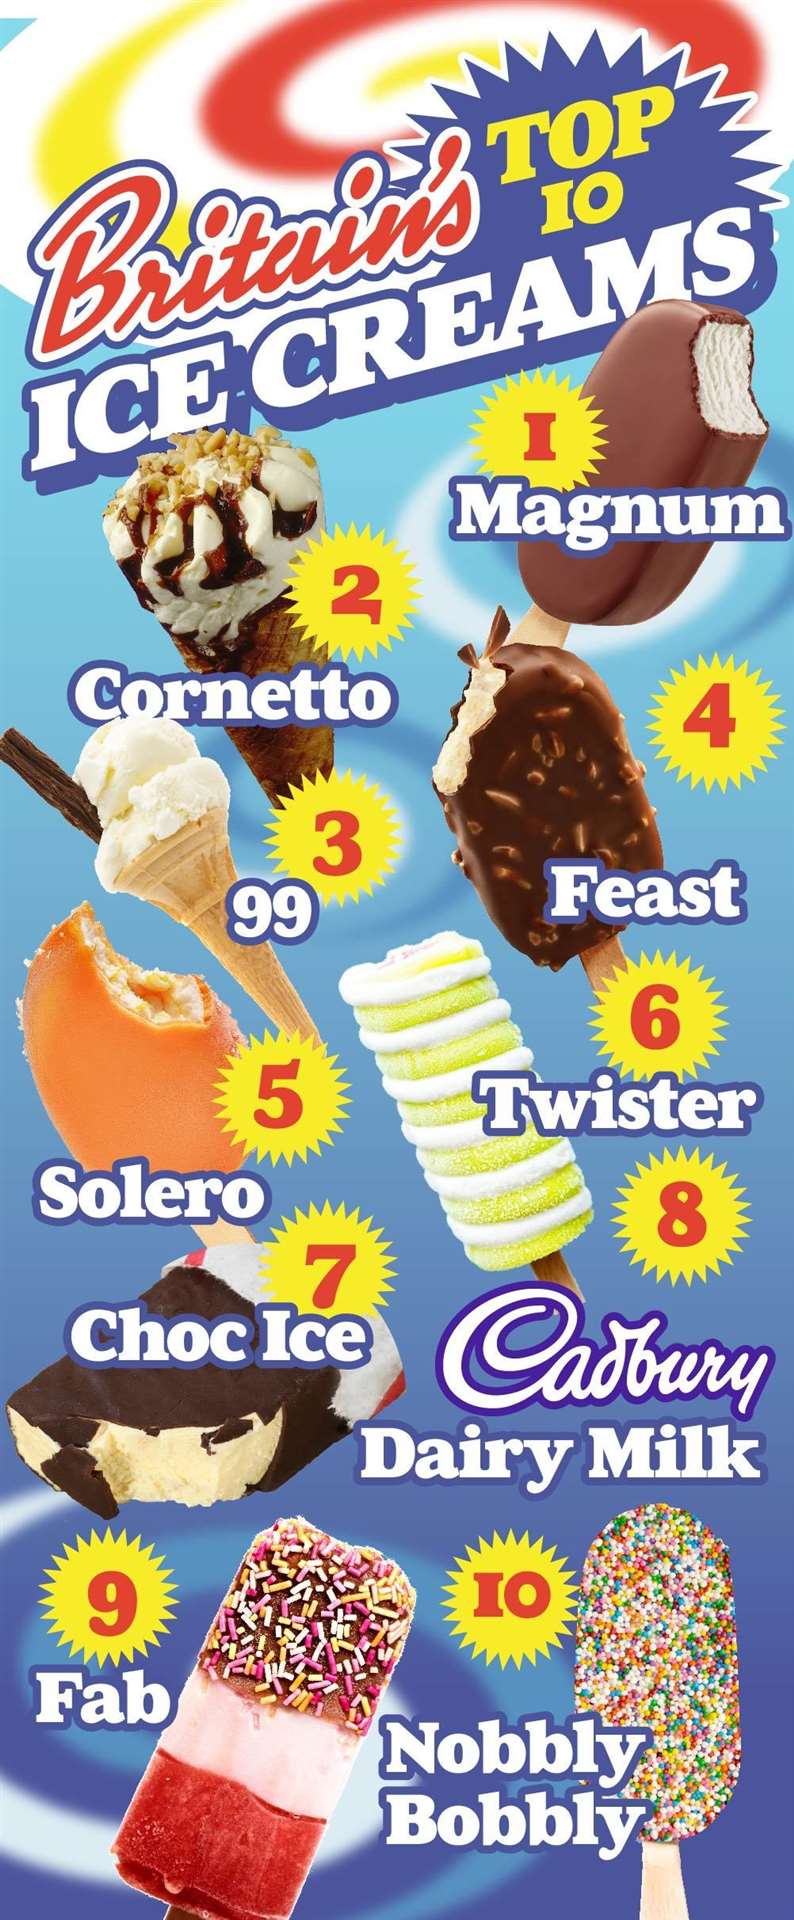 The nation's top 10 ice creams according to a recent survey of thousands of people by Gala Bingo